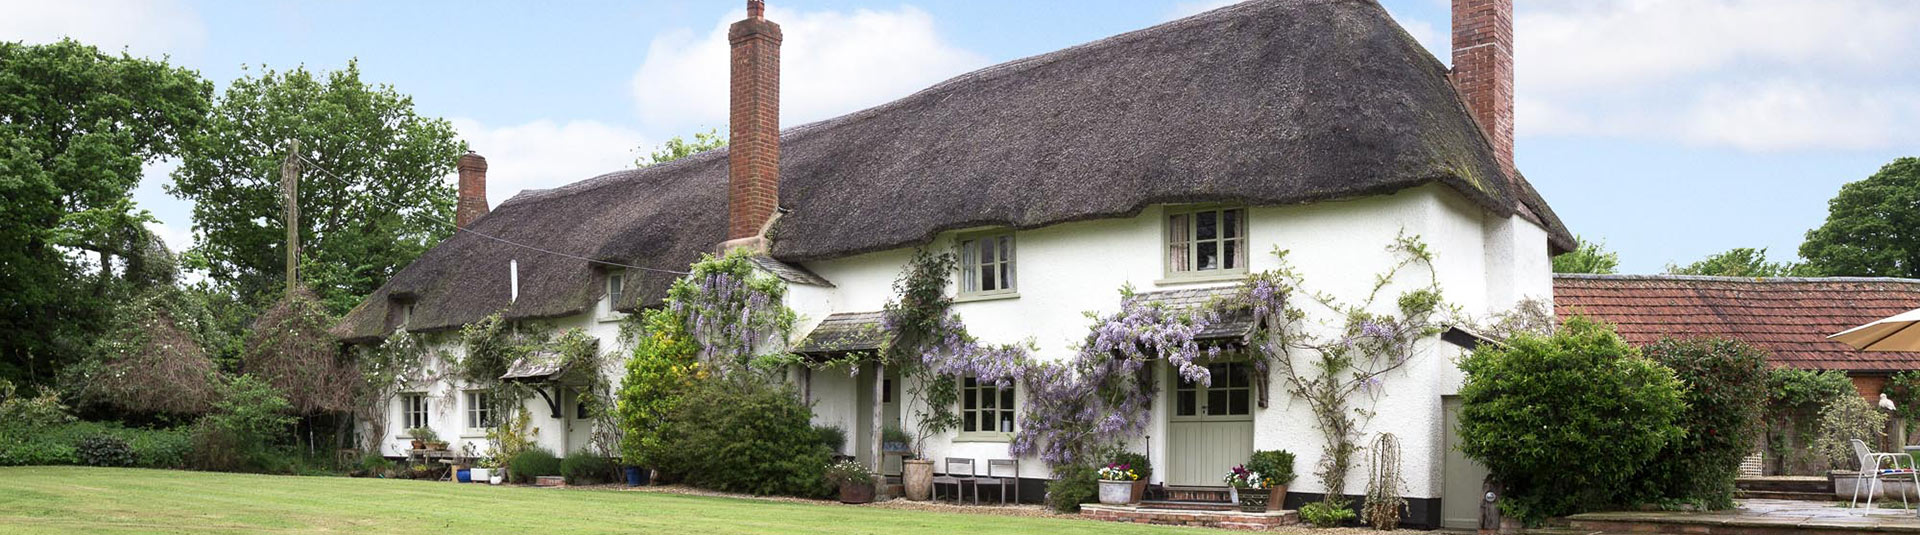 Thatched Holiday Cottages in Devon